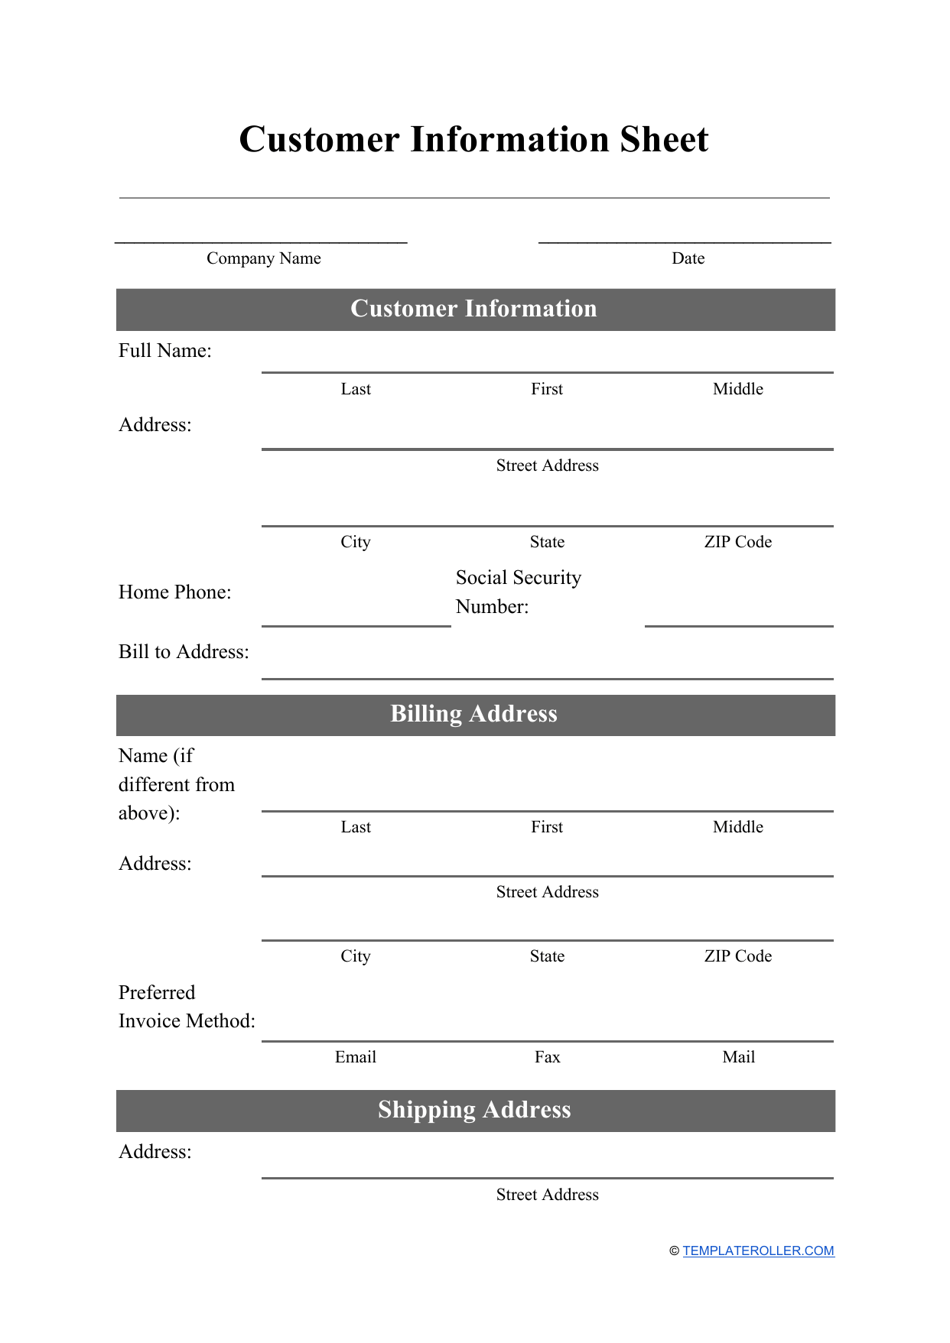 customer-information-sheet-template-fill-out-sign-online-and-download-pdf-templateroller